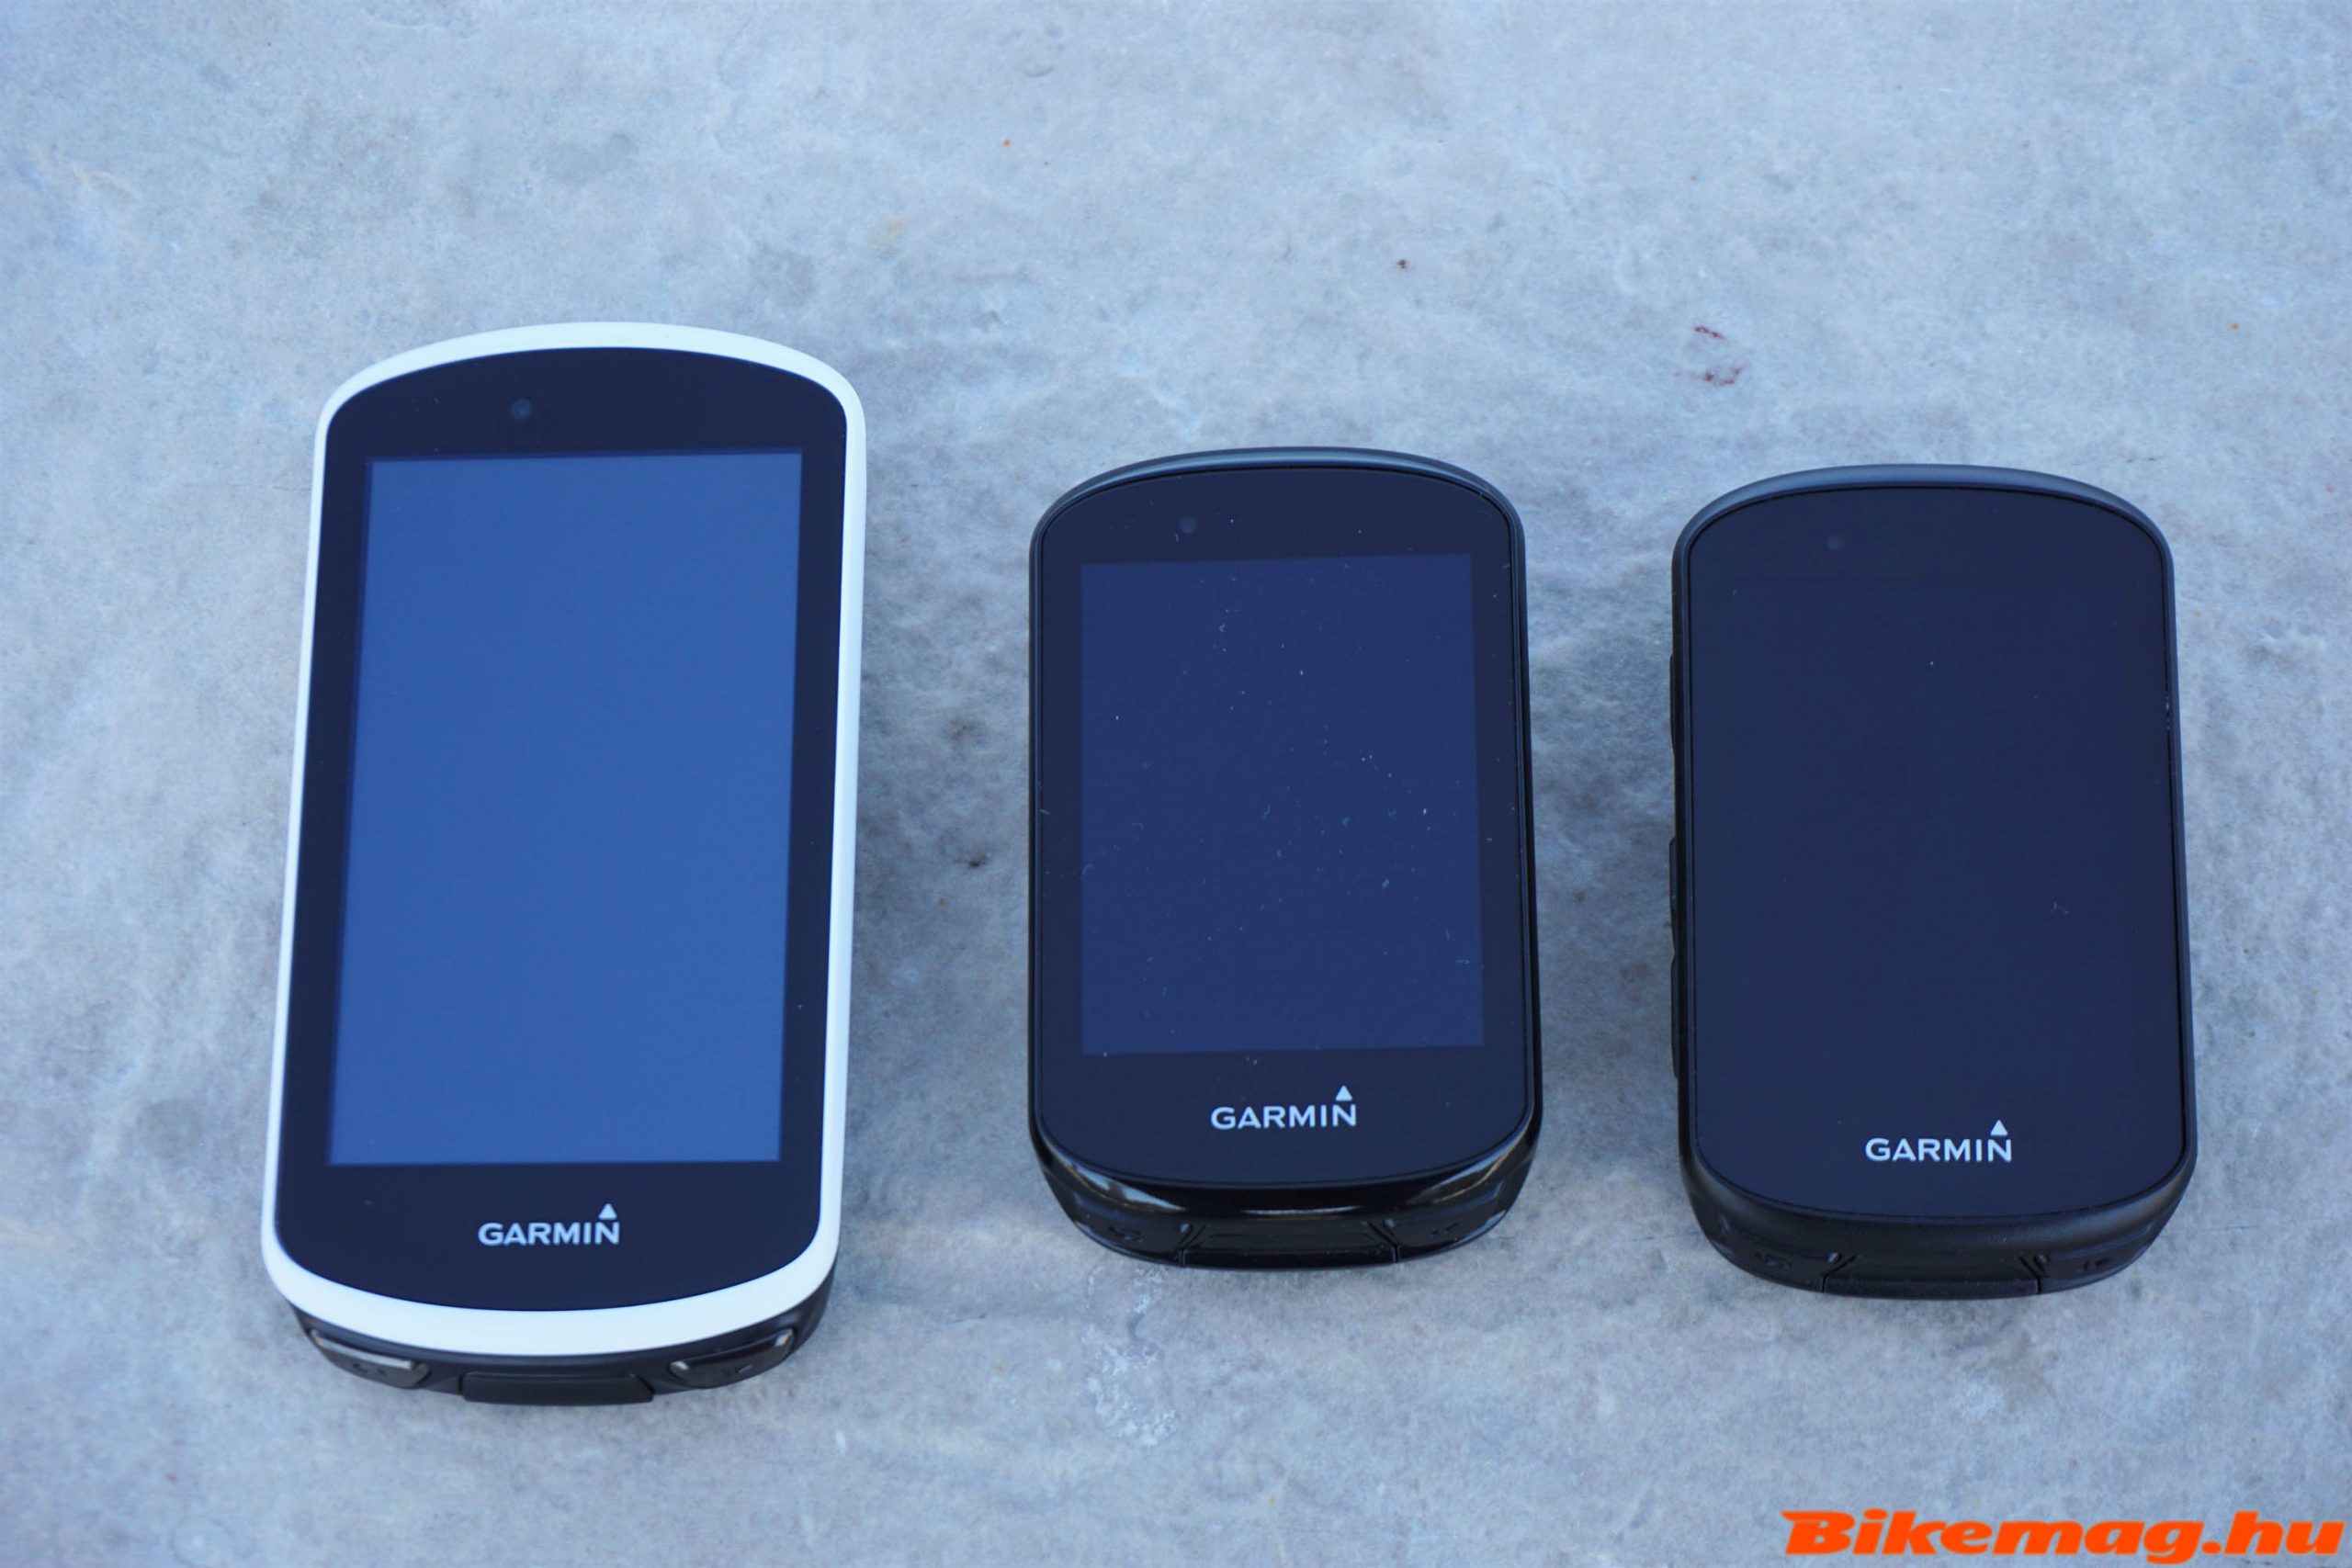 Garmin Edge 530 Specifications, Comparison to 830, 820, 1030 and Opinion